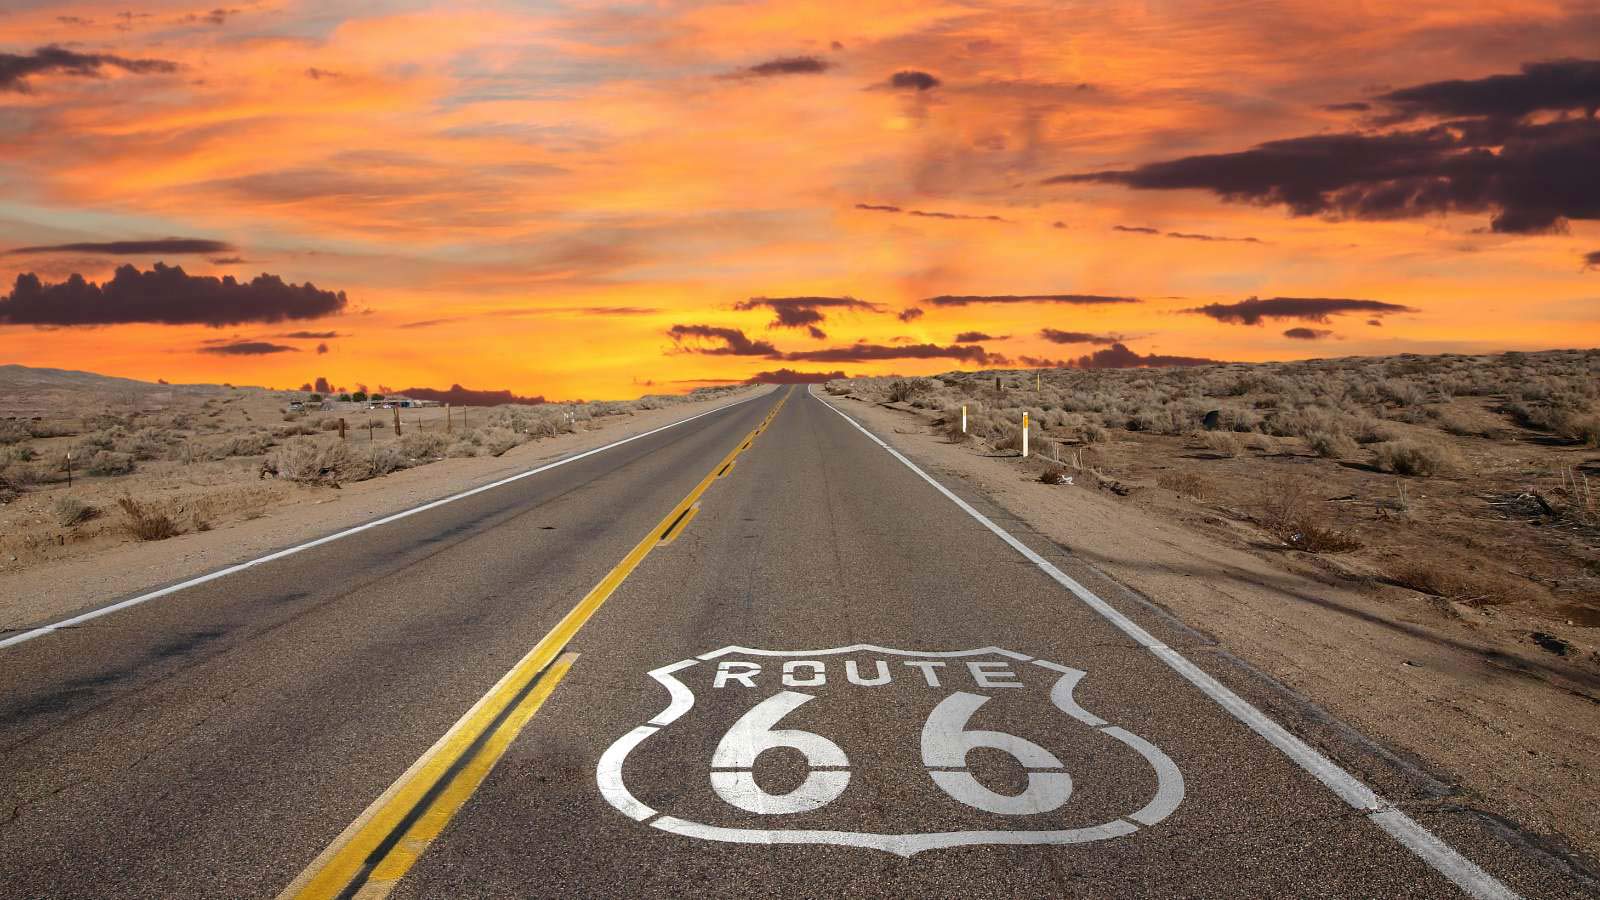 <p>The “mother of all road trips,” Route 66 starts in Chicago, Illinois, and stretches all the way to Santa Monica, California. This route was how many people got to California in the 40s, 50s, and 60s. Along the way, there are many historic and weird things to see. While many people don’t do the entire route anymore, it’s worth doing parts of it.</p>